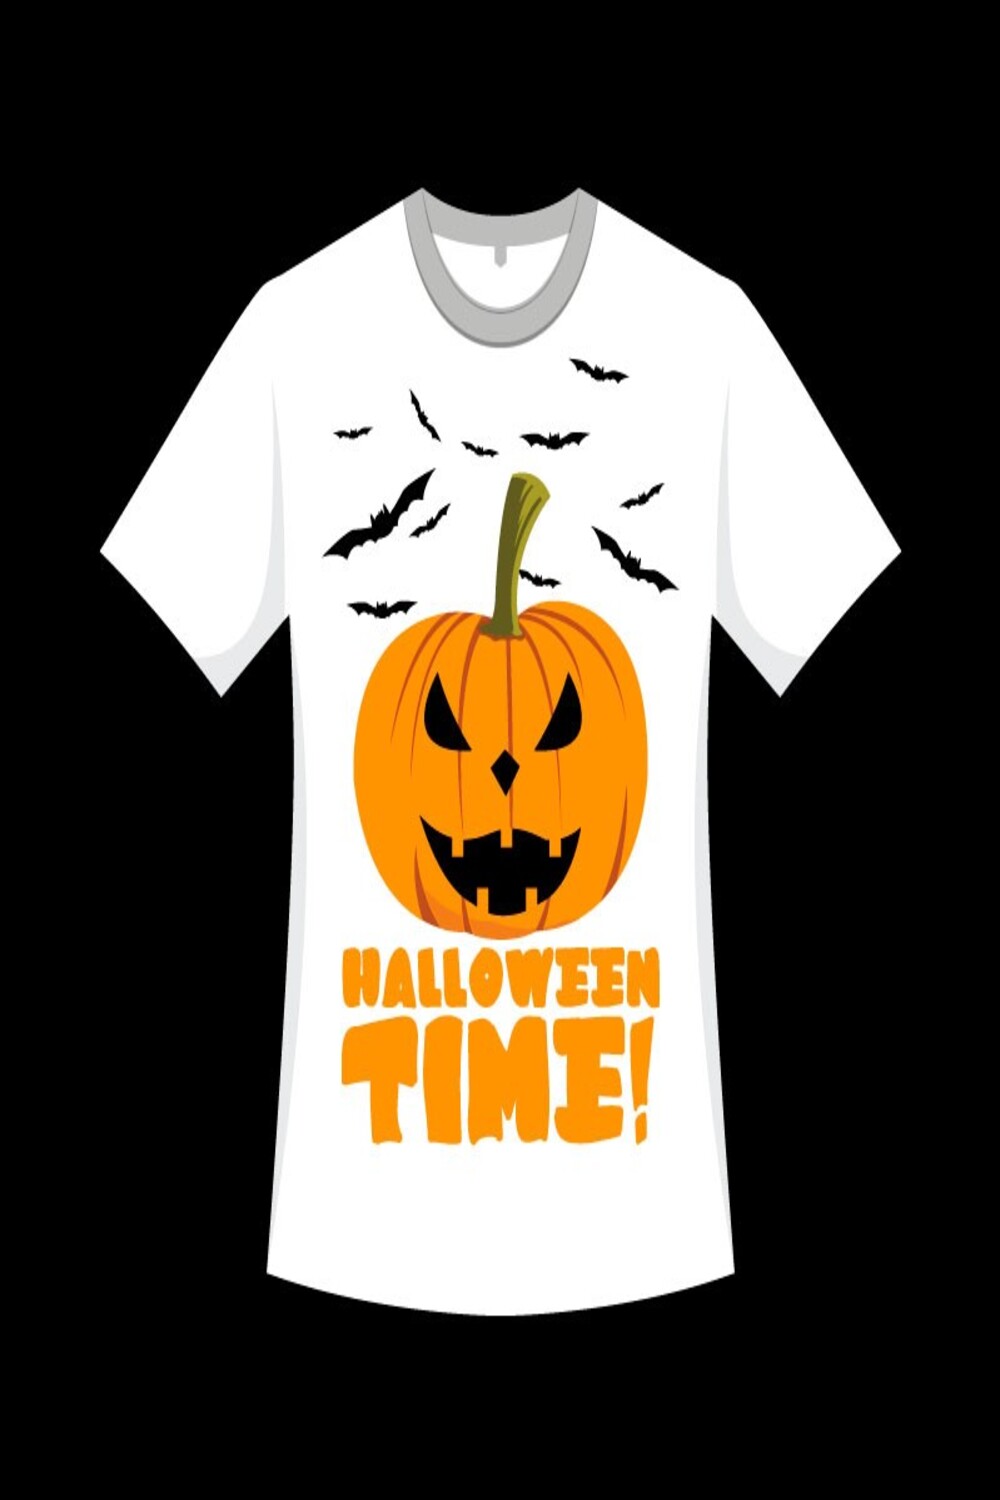 White t-shirt with smiling pumpkin and black bats.